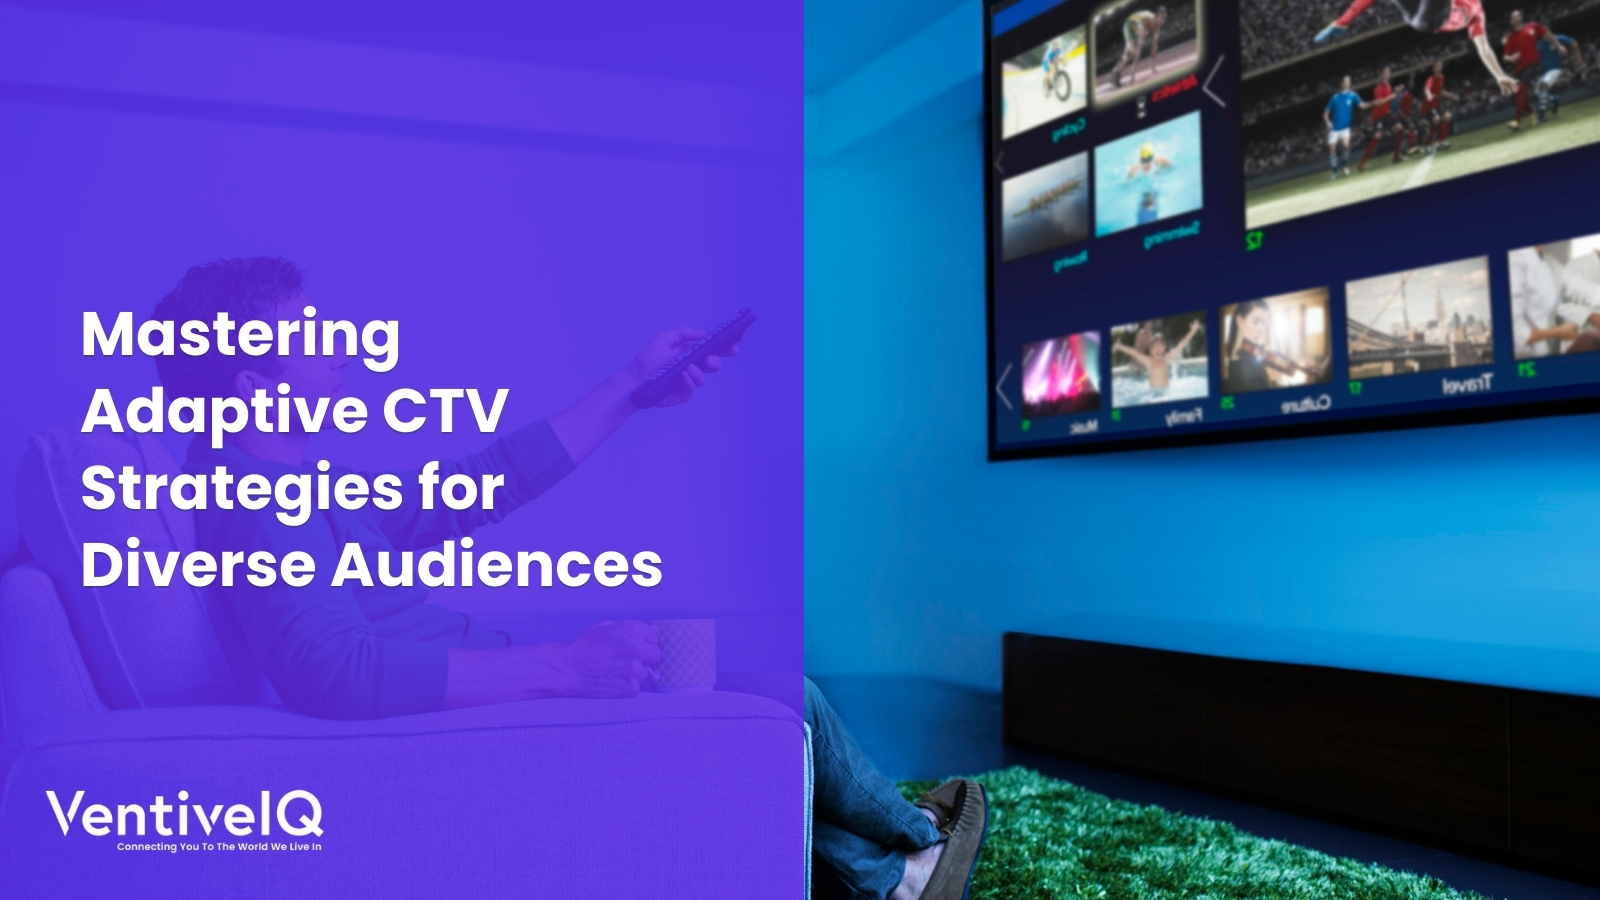 Mastering Adaptive CTV Strategies for Diverse Audiences